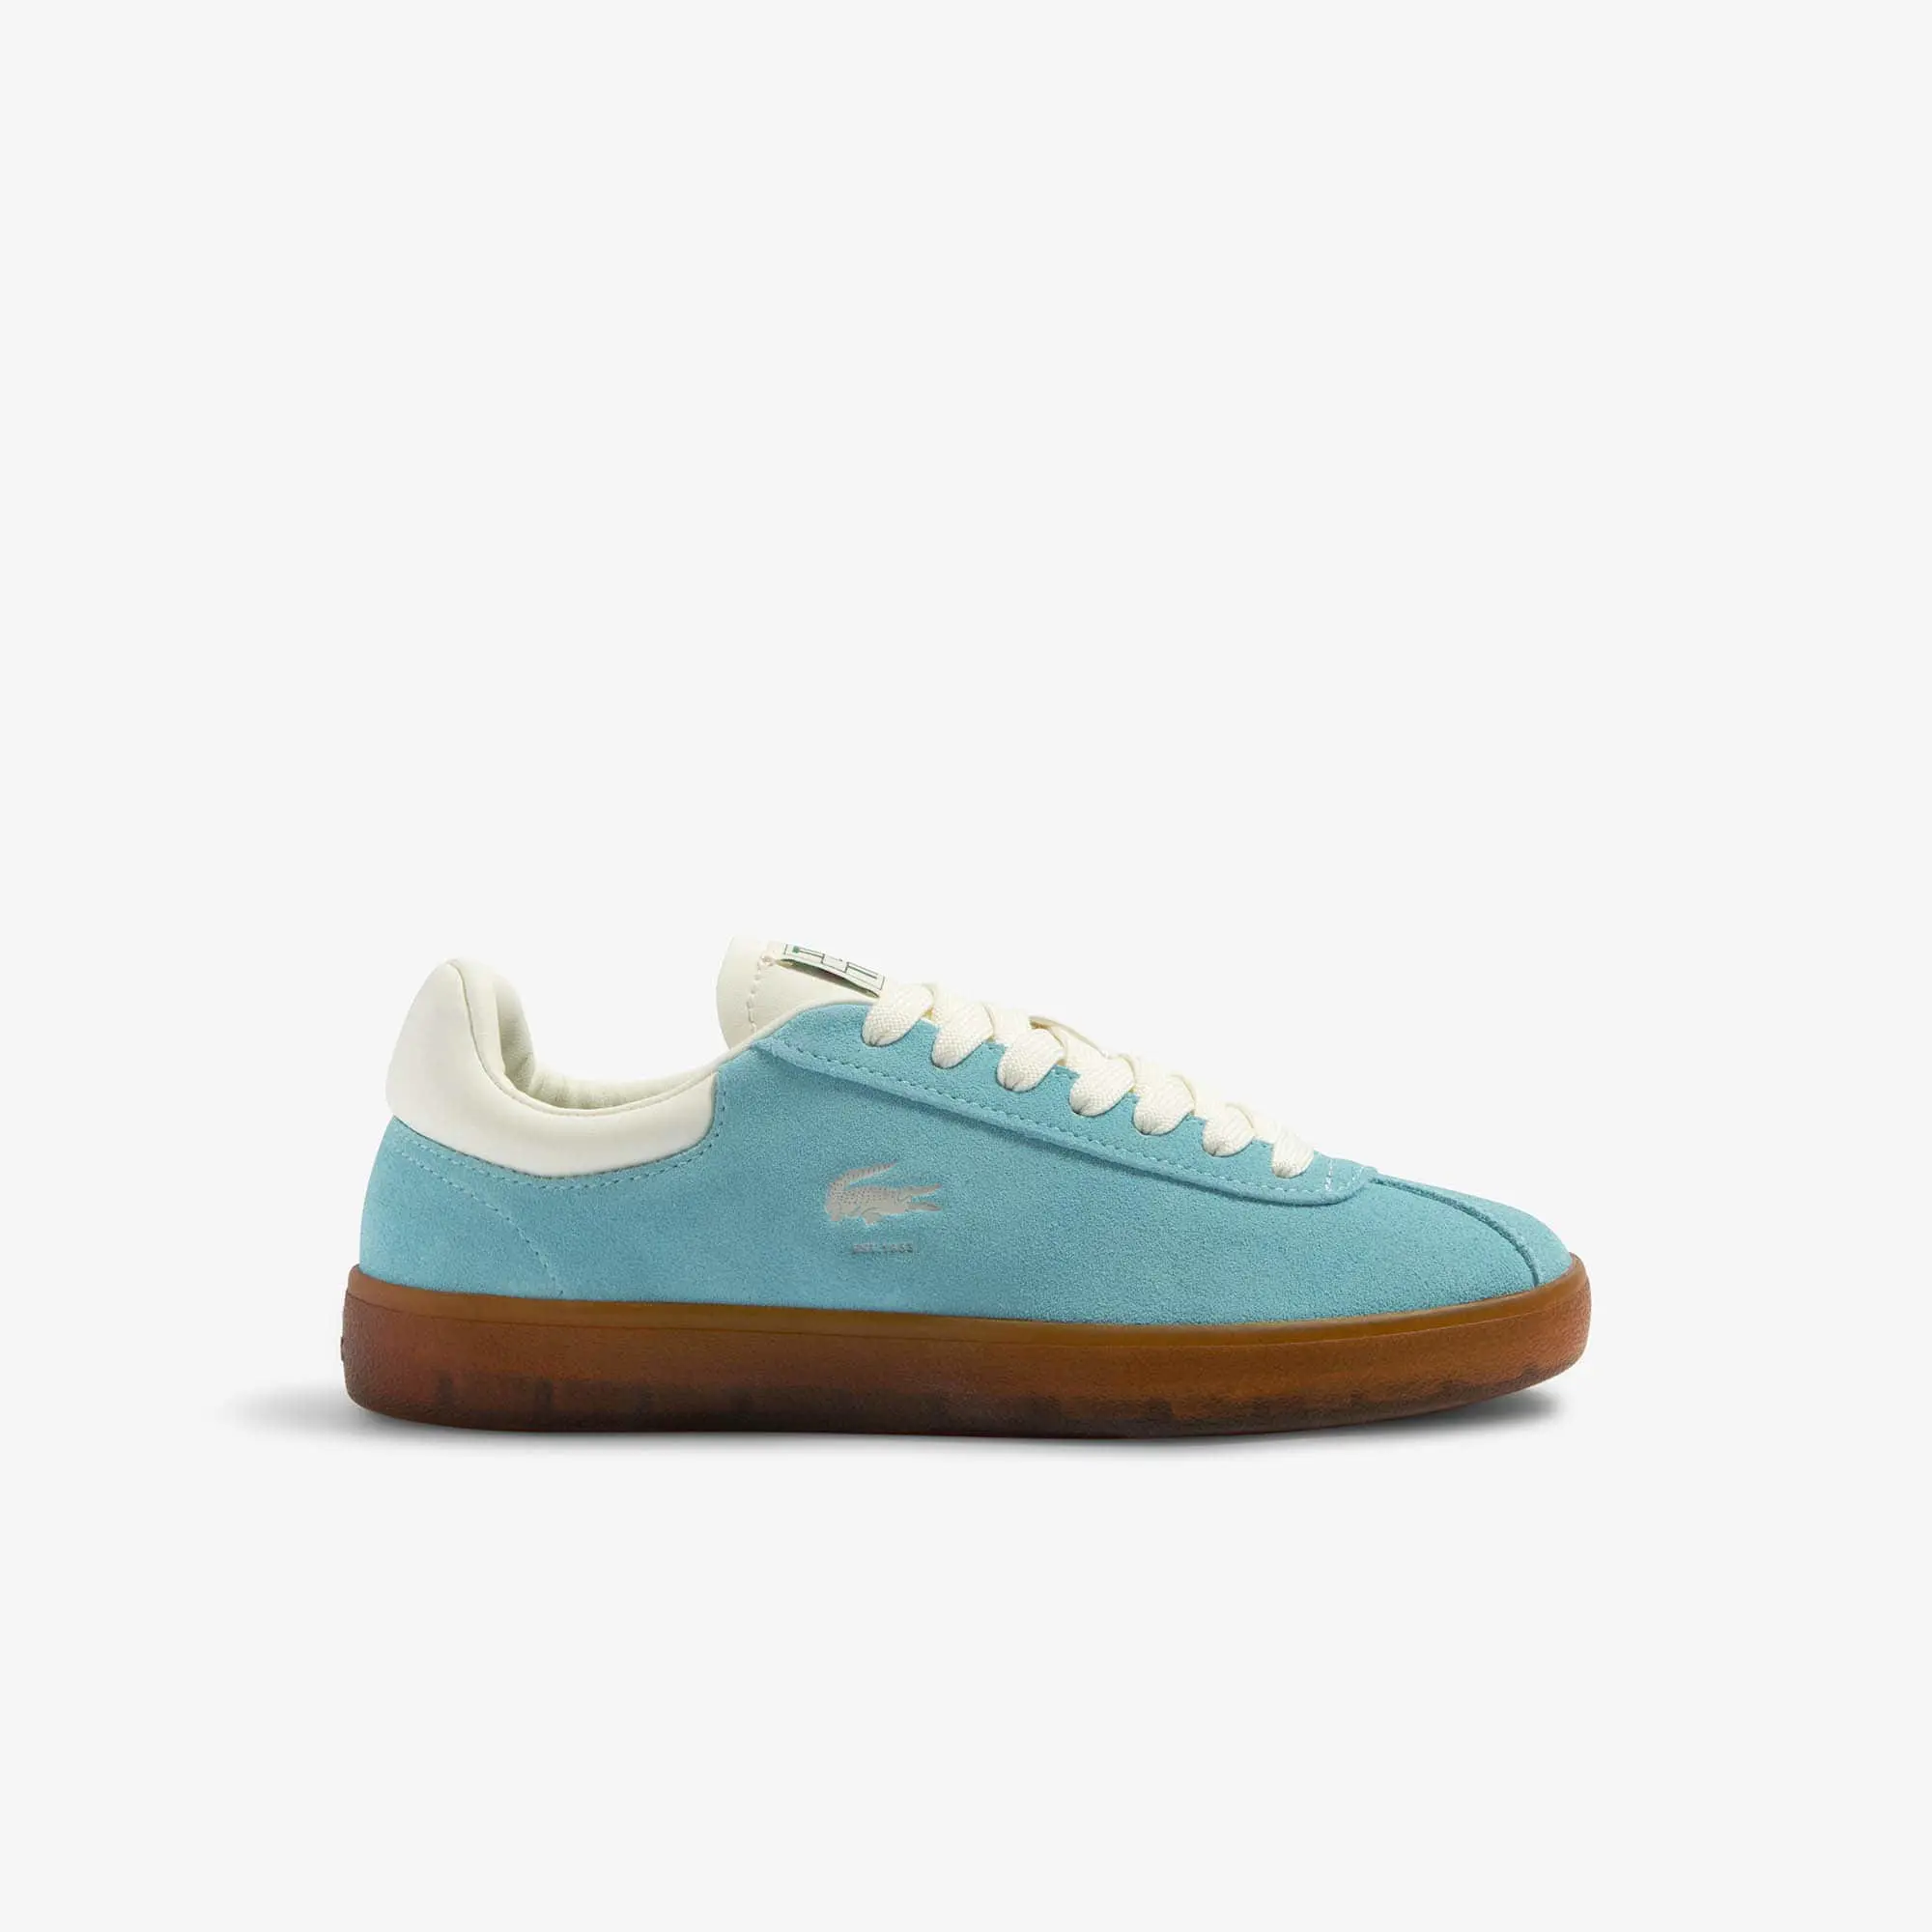 Lacoste Women's Baseshot Translucent Sole Sneakers. 1